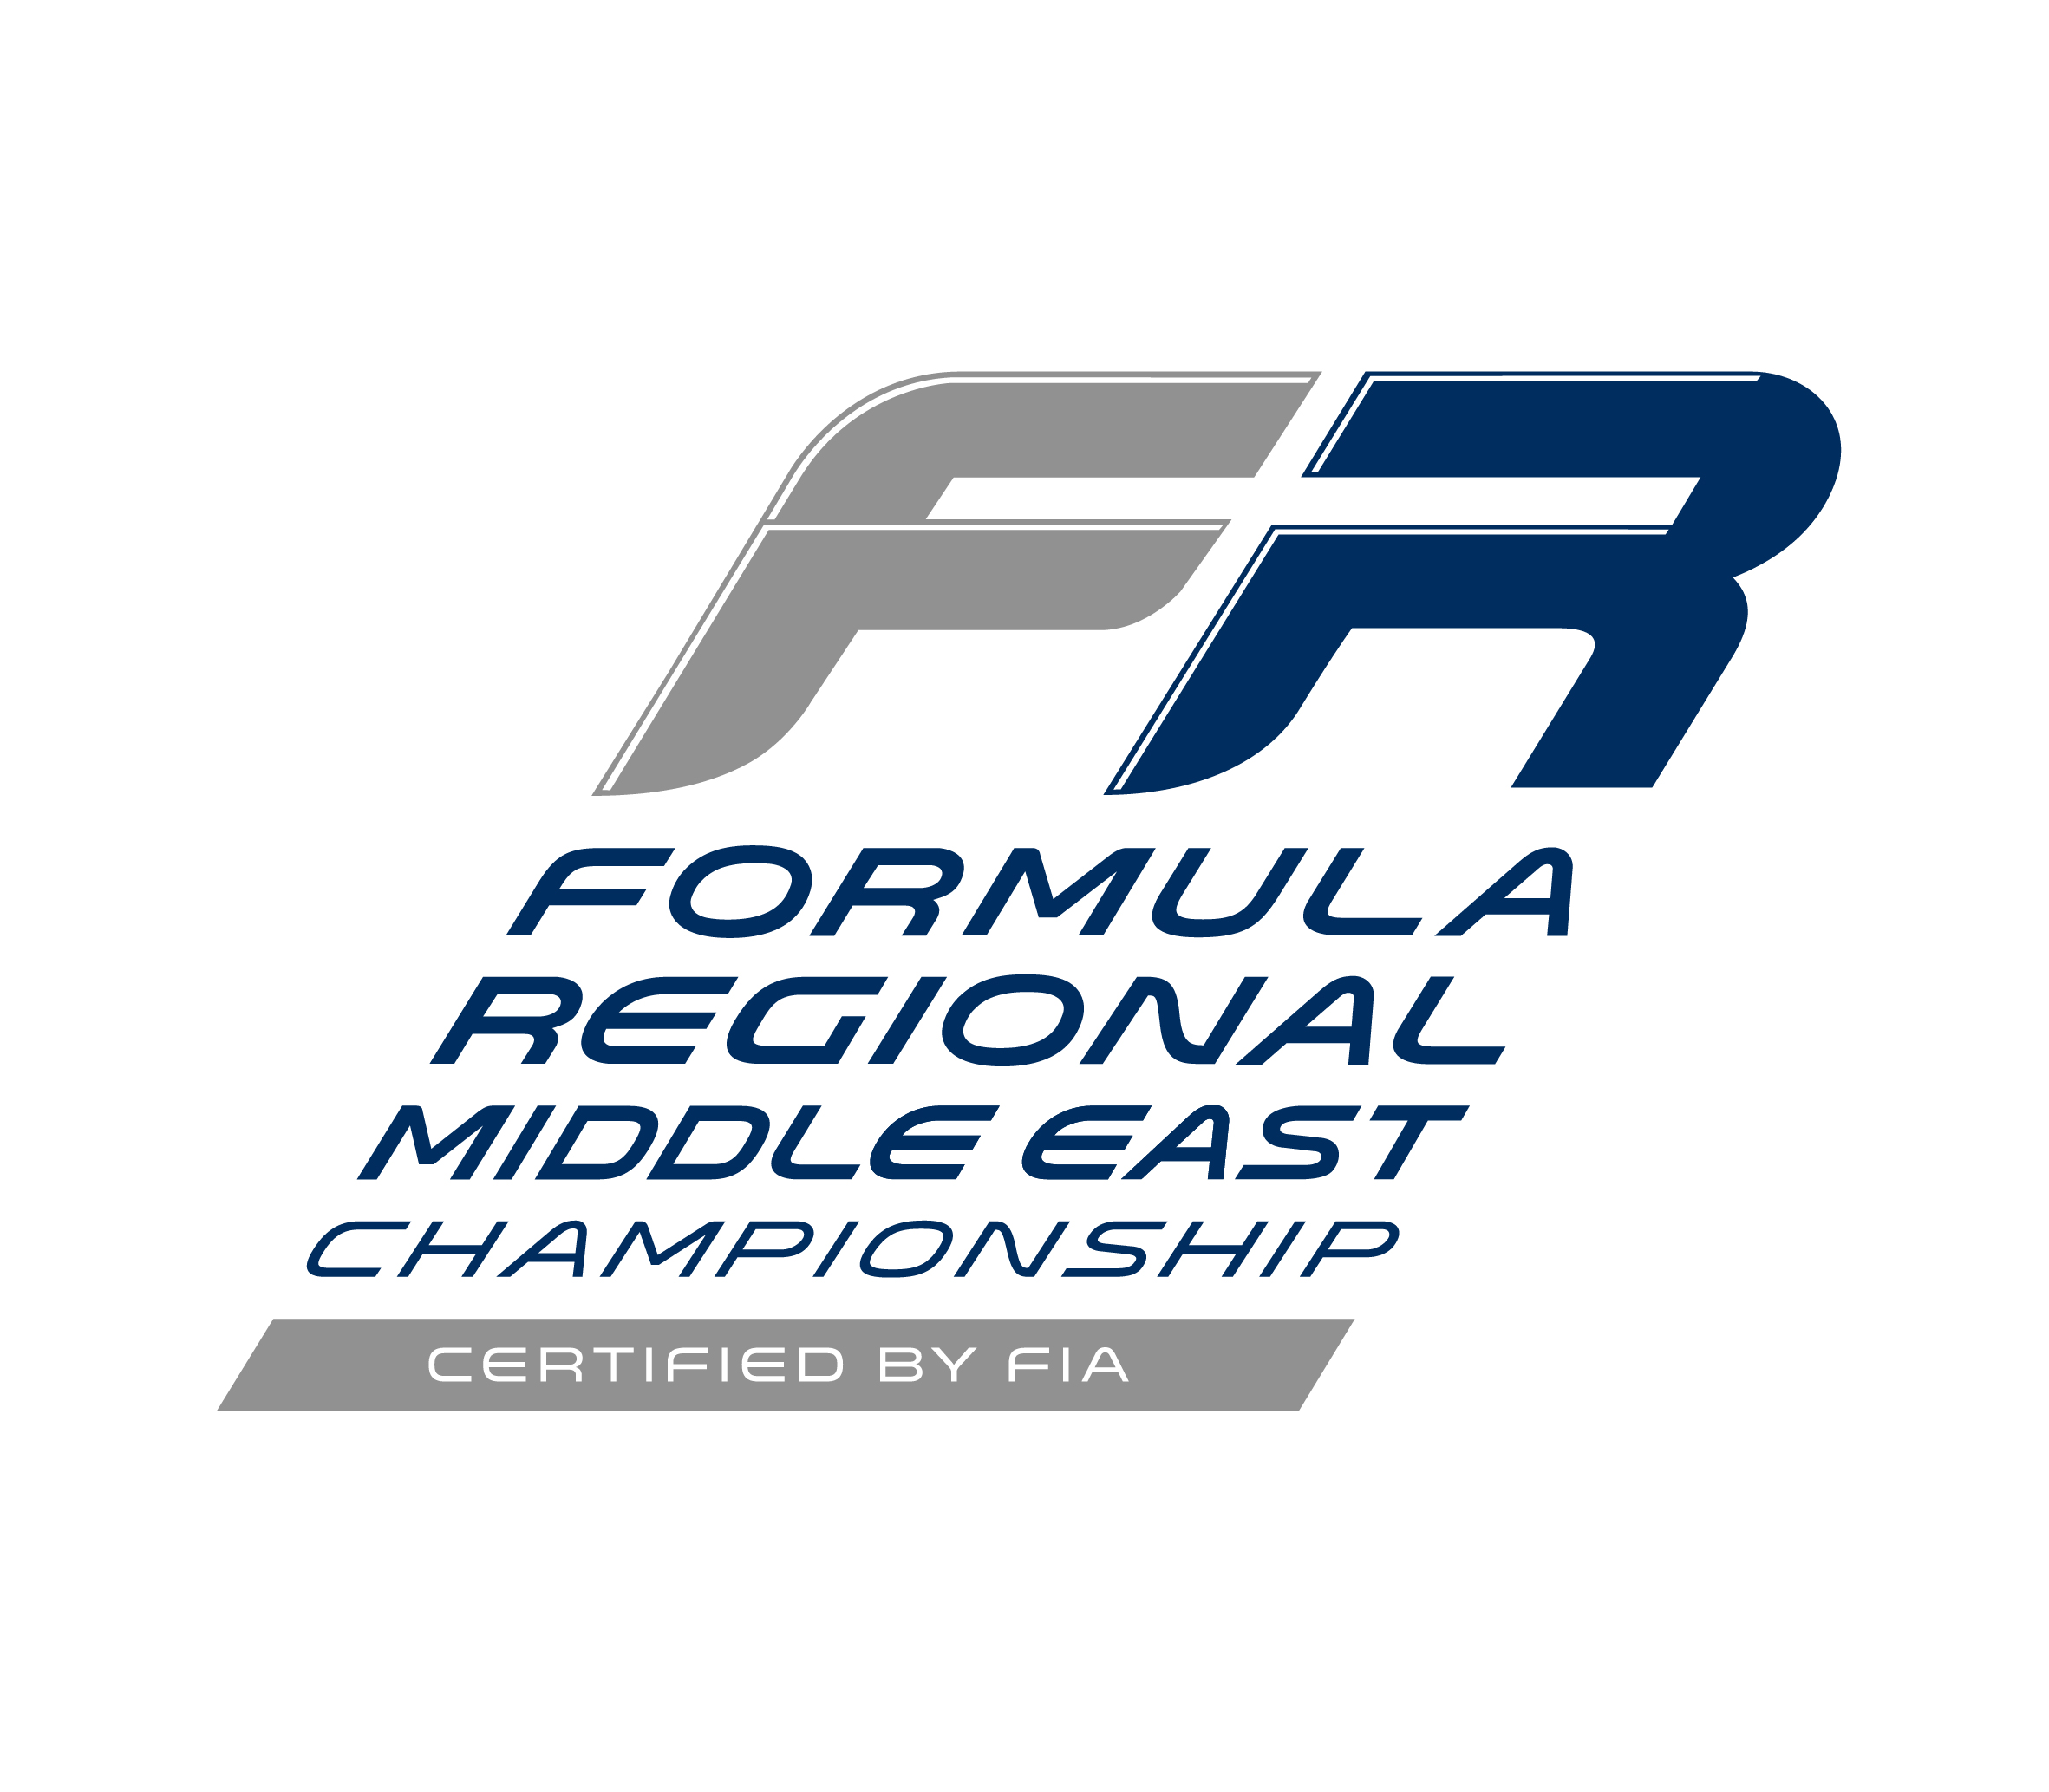 Formula Regional Middle East Championship certified by FIA announced